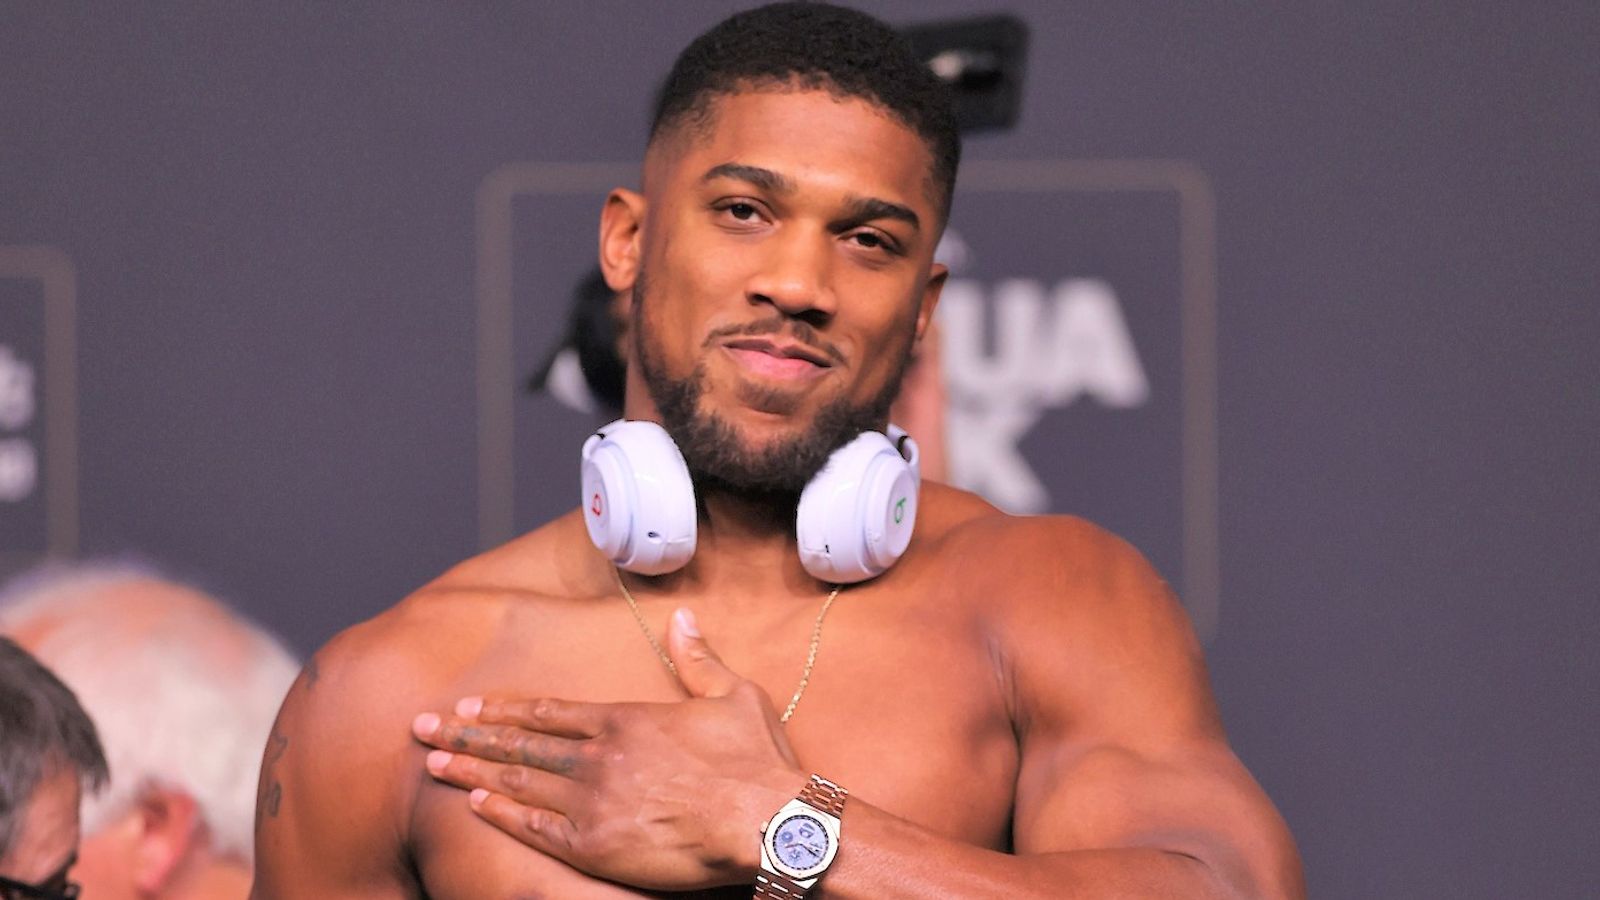 Anthony Joshua is showing 'serious intentions' ahead of Oleksandr Usyk rematch, says Johnny Nelson | Boxing News | Sky Sports